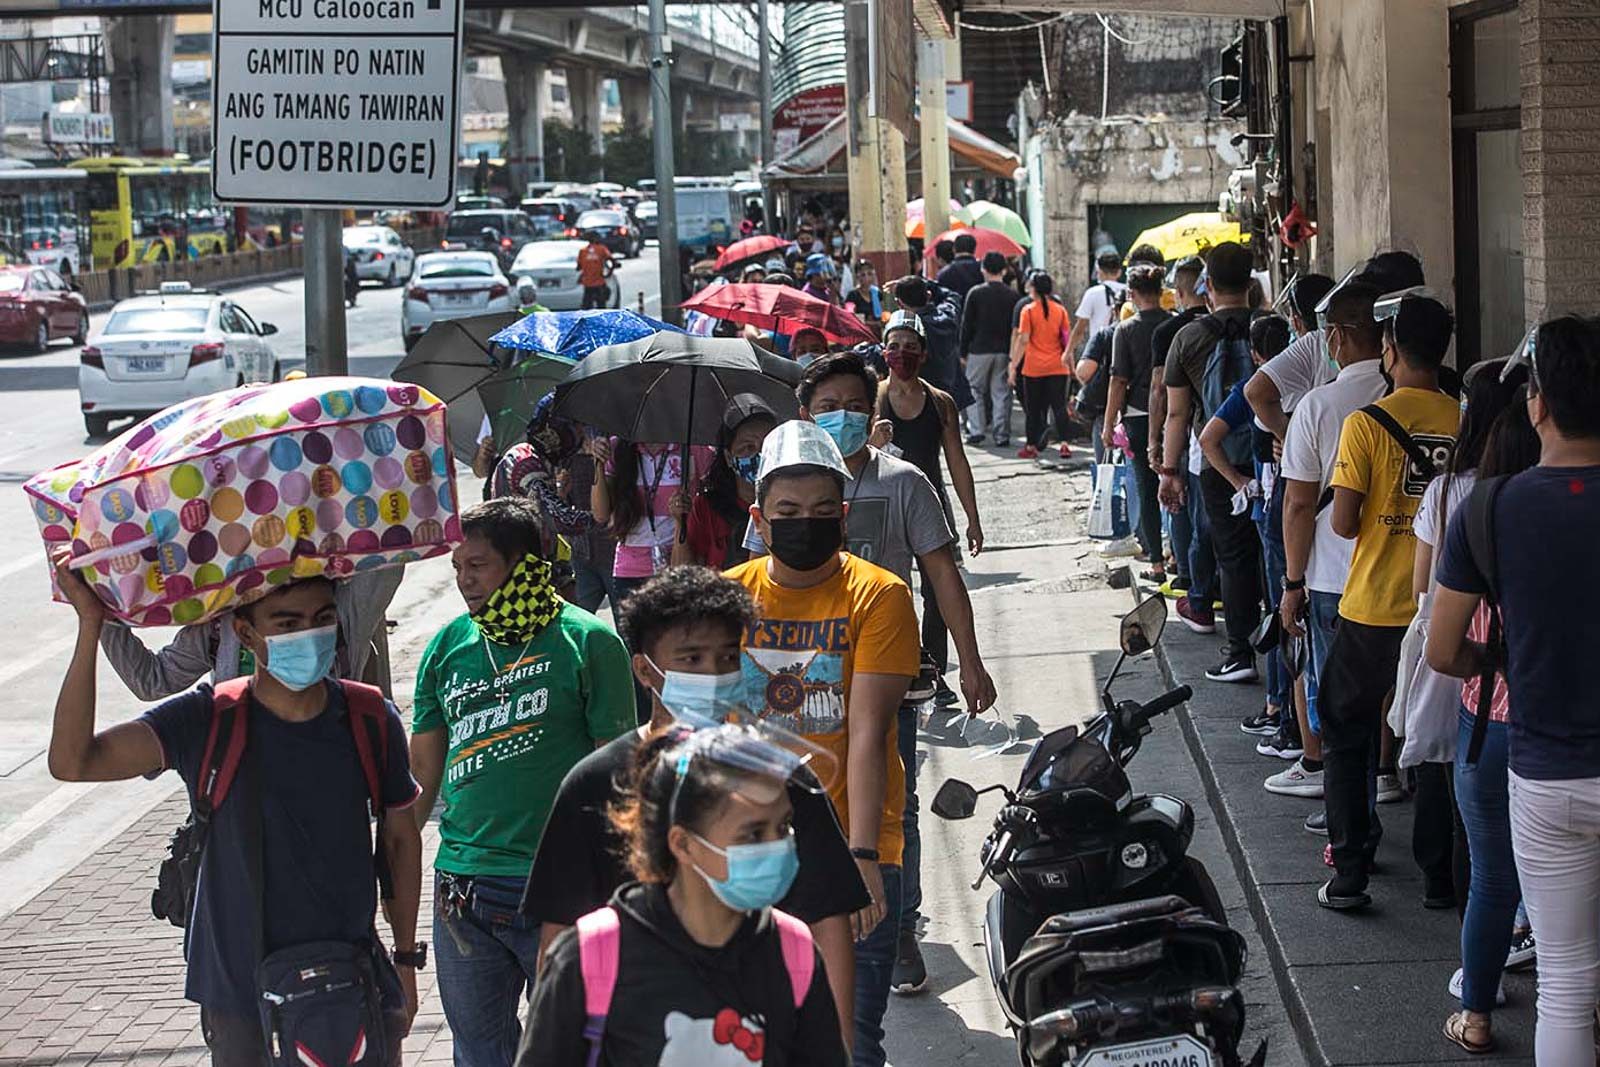 Philippines back to ‘moderate risk’ due to increase in COVID-19 cases – DOH